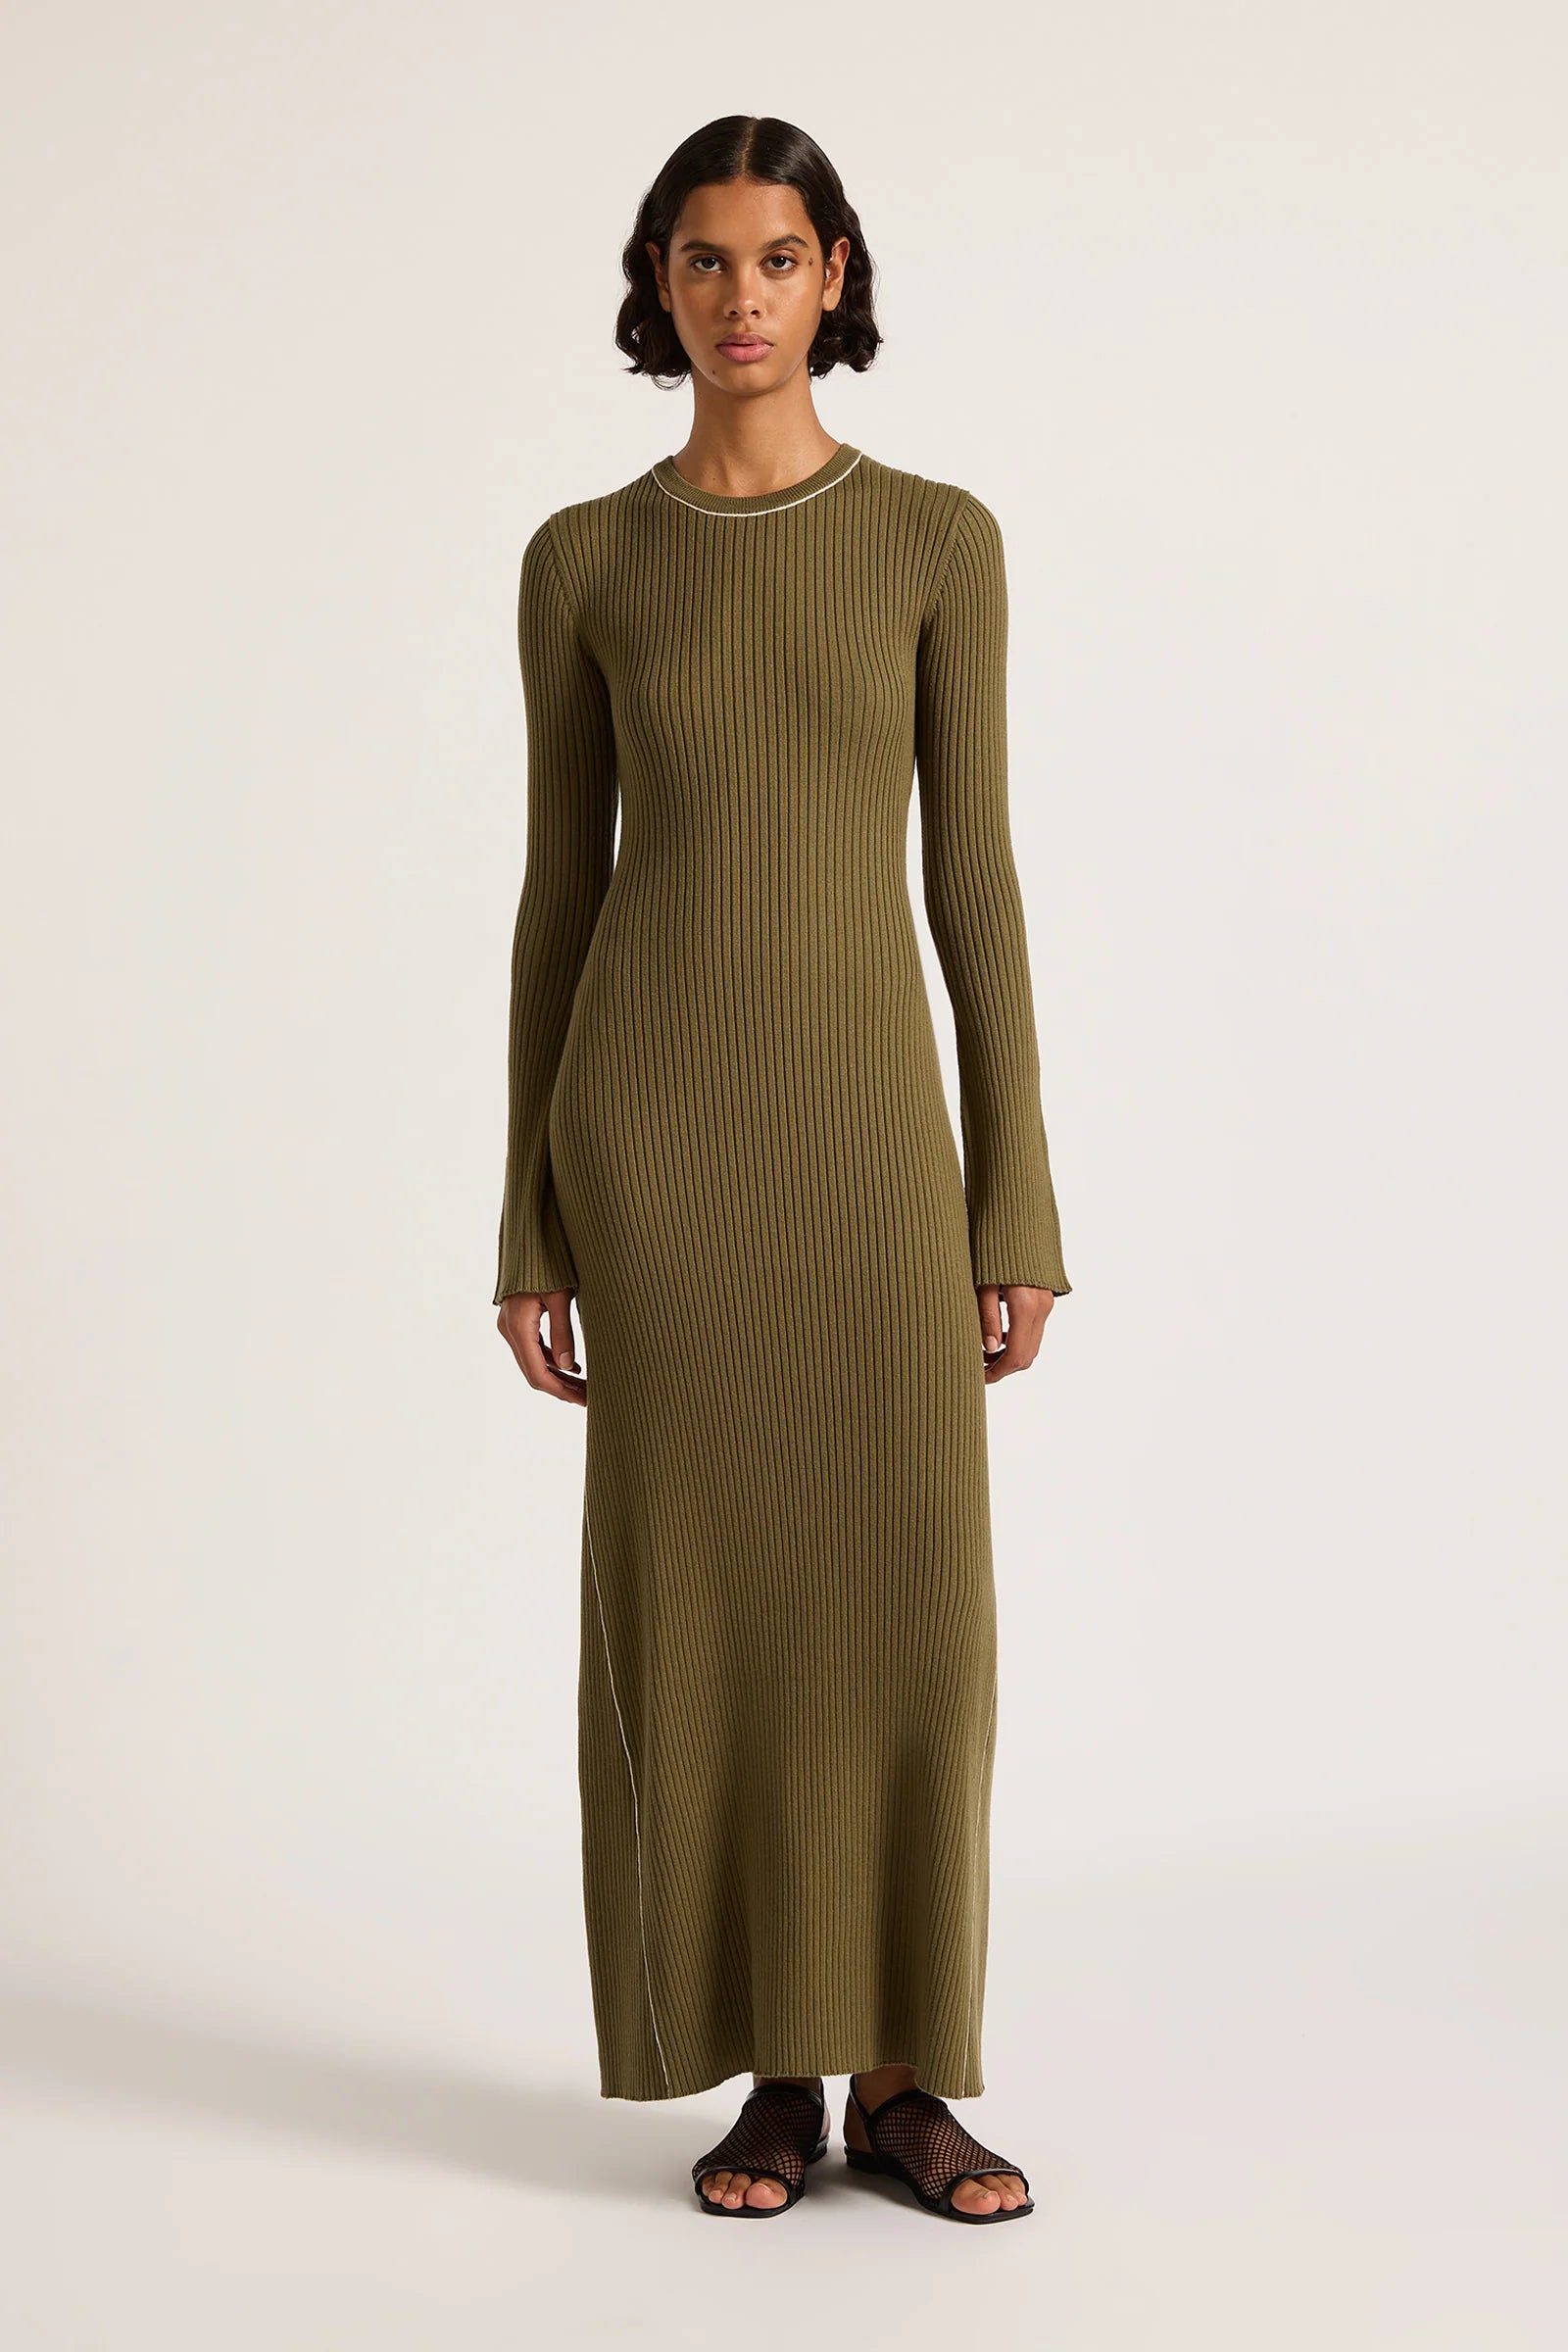 NUDE LUCY Gaia knit maxi dress - Olive